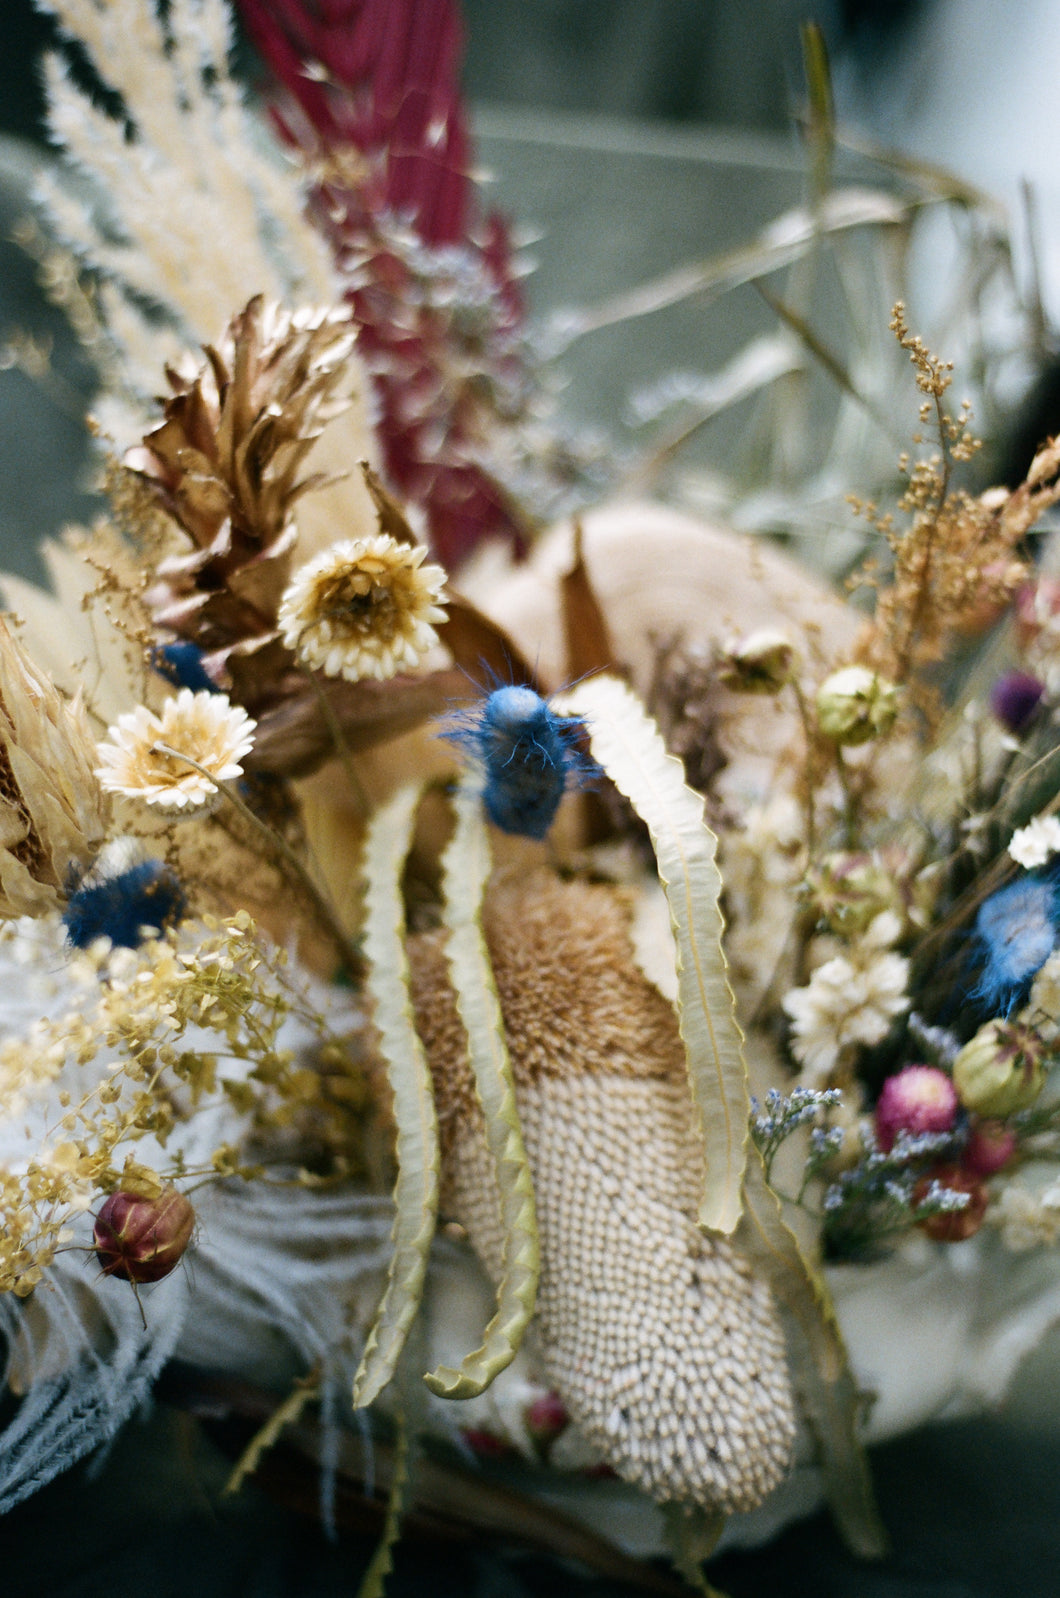 Dried Bouquets